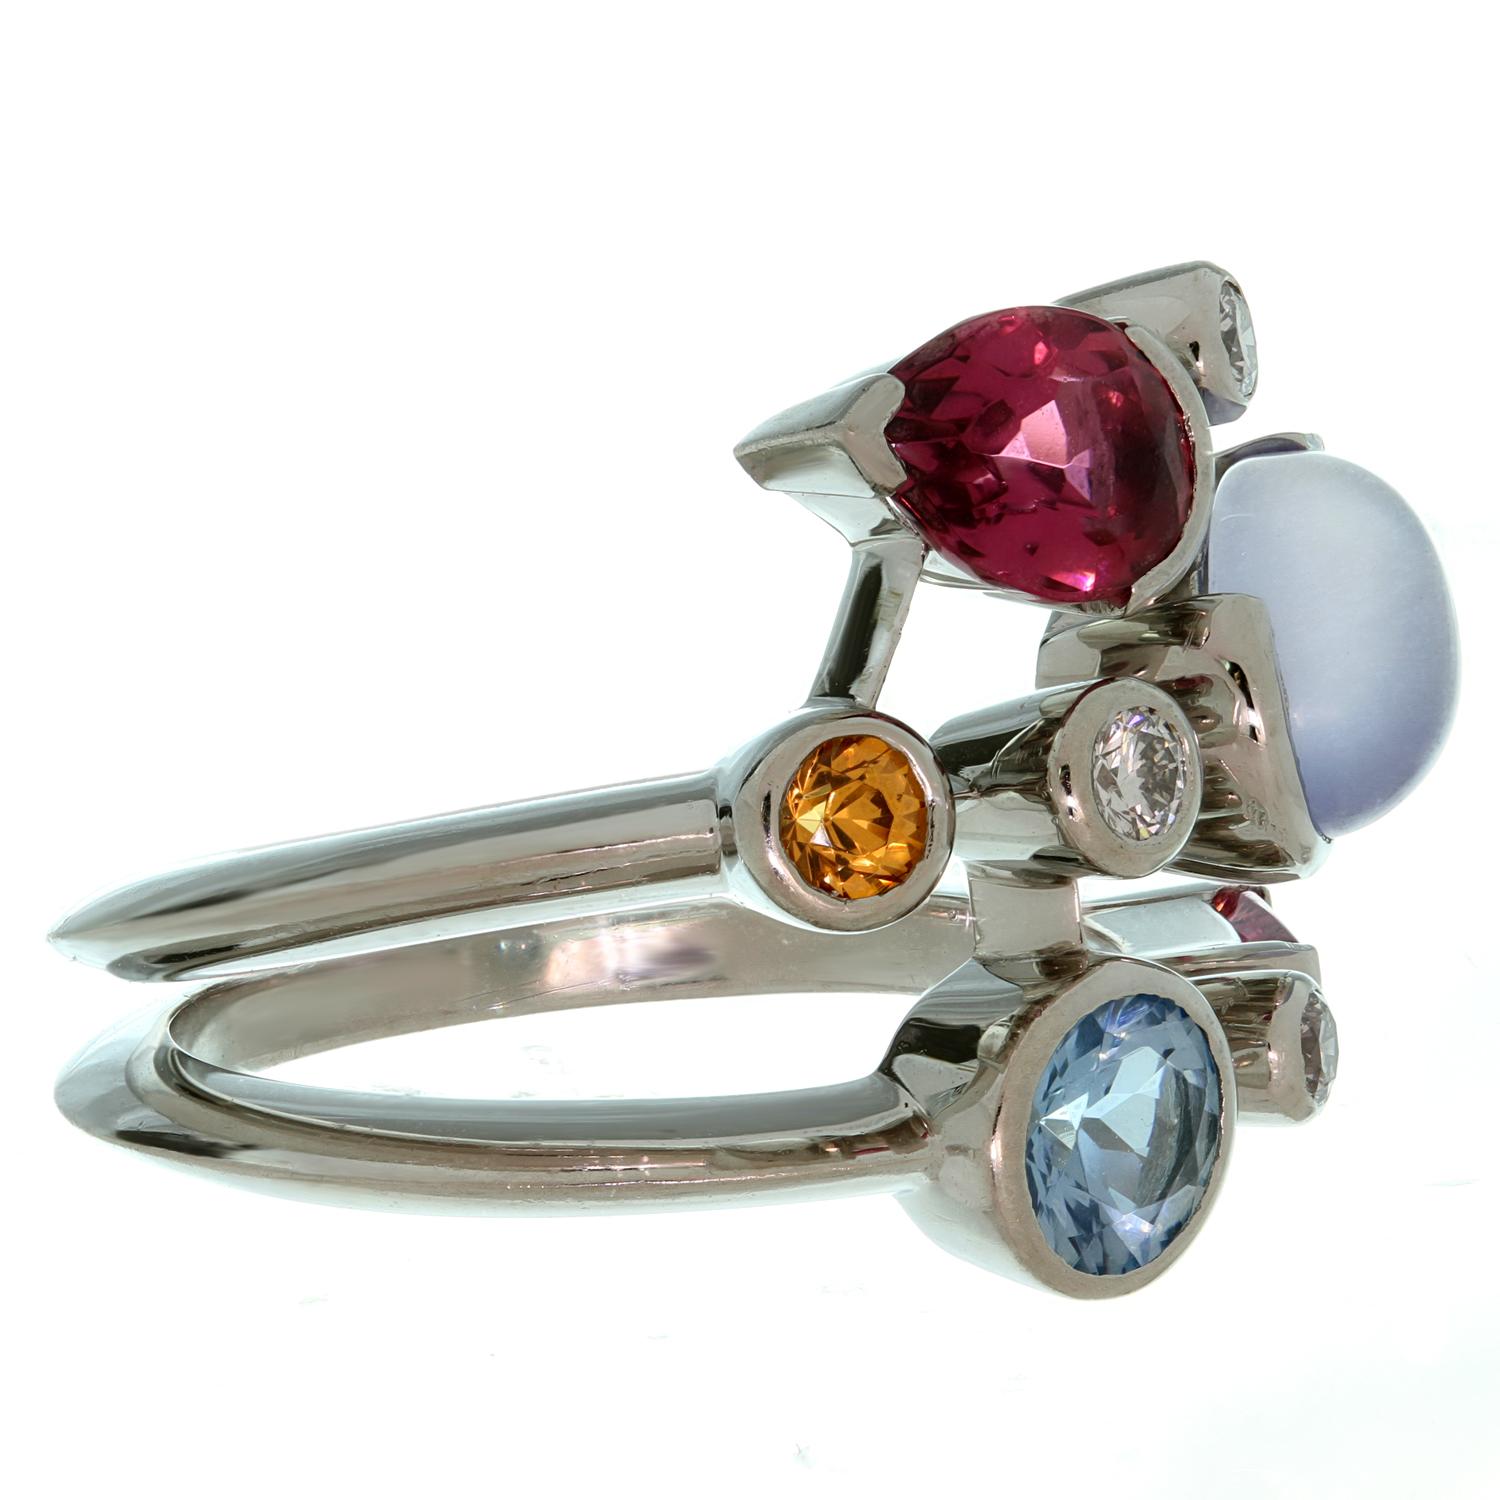 This fabulous Cartier ring from the vibrant Meli Melo collection is crafted in platinum and features 8 gemstones abstractly placed over 3 rows, consisting of diamonds, aquamarine, chalcedony, garnet and pink tourmaline. There are 3 round brilliant